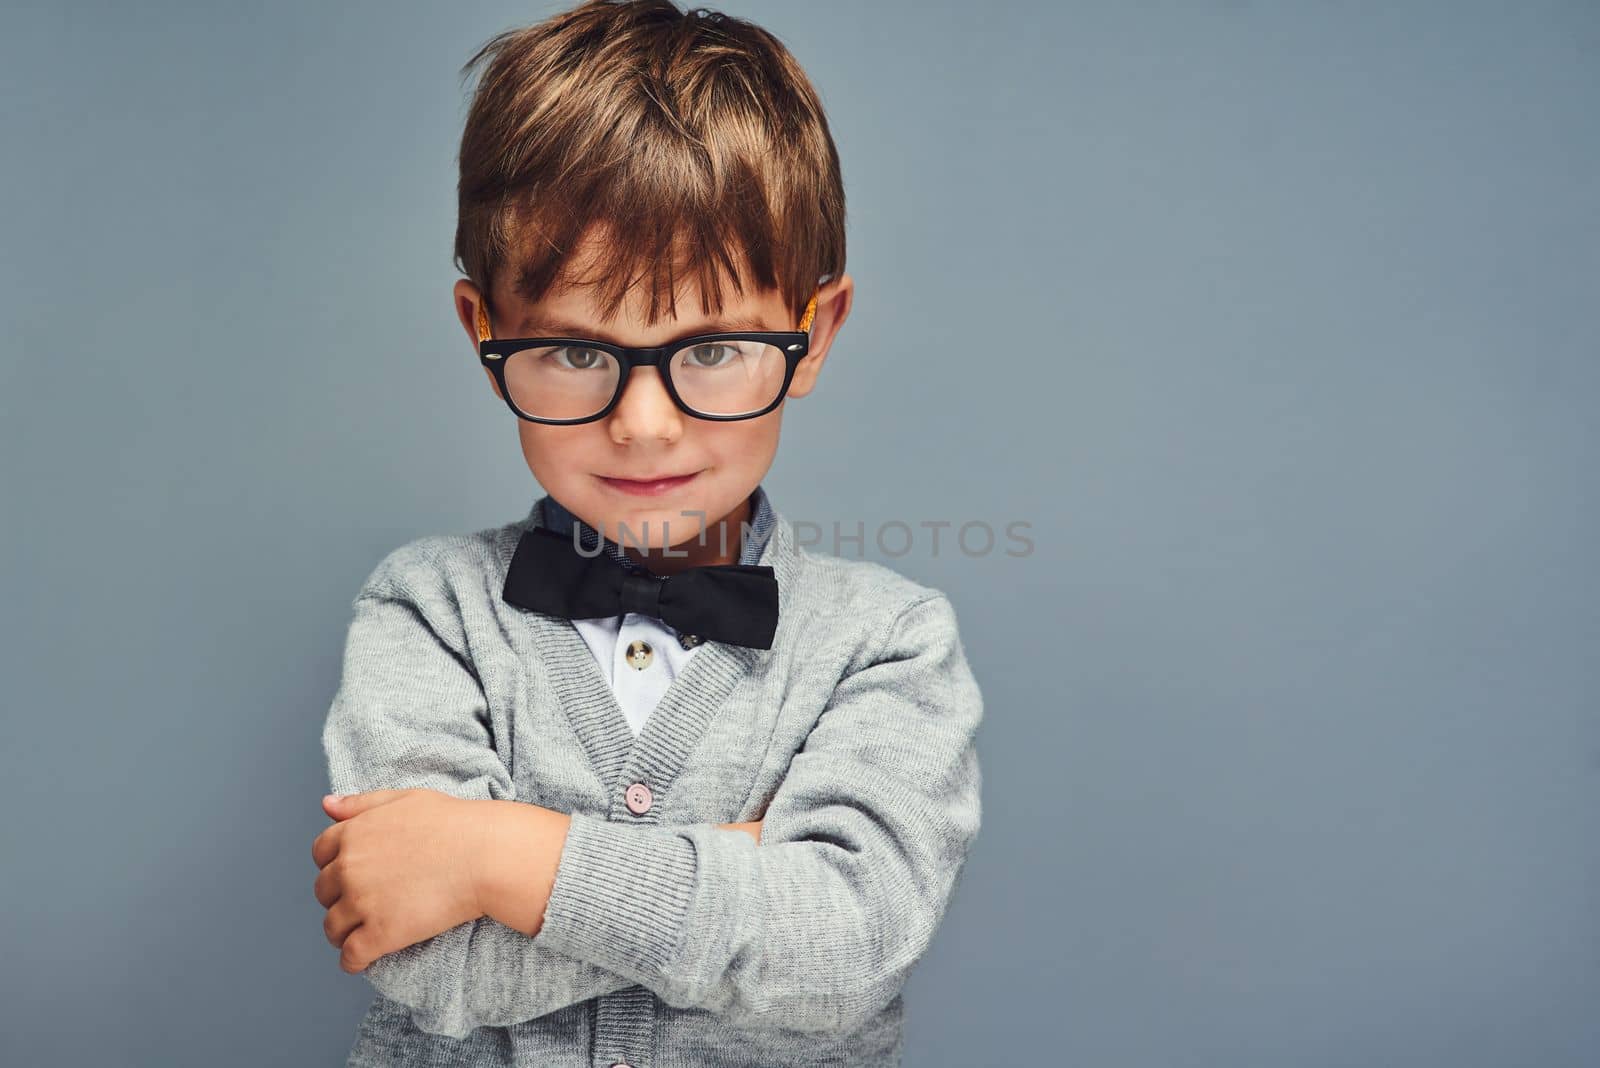 Its cool to be clever. Studio portrait of a smartly dressed little boy posing confidently against a gray background